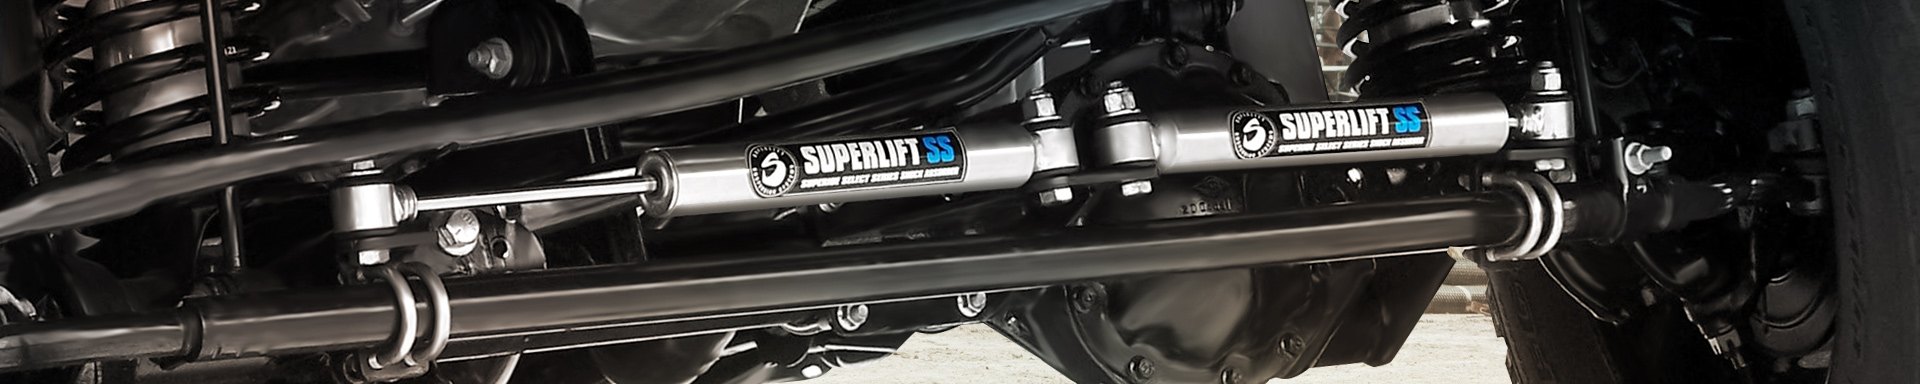 Superlift Racing Chassis & Suspension Parts